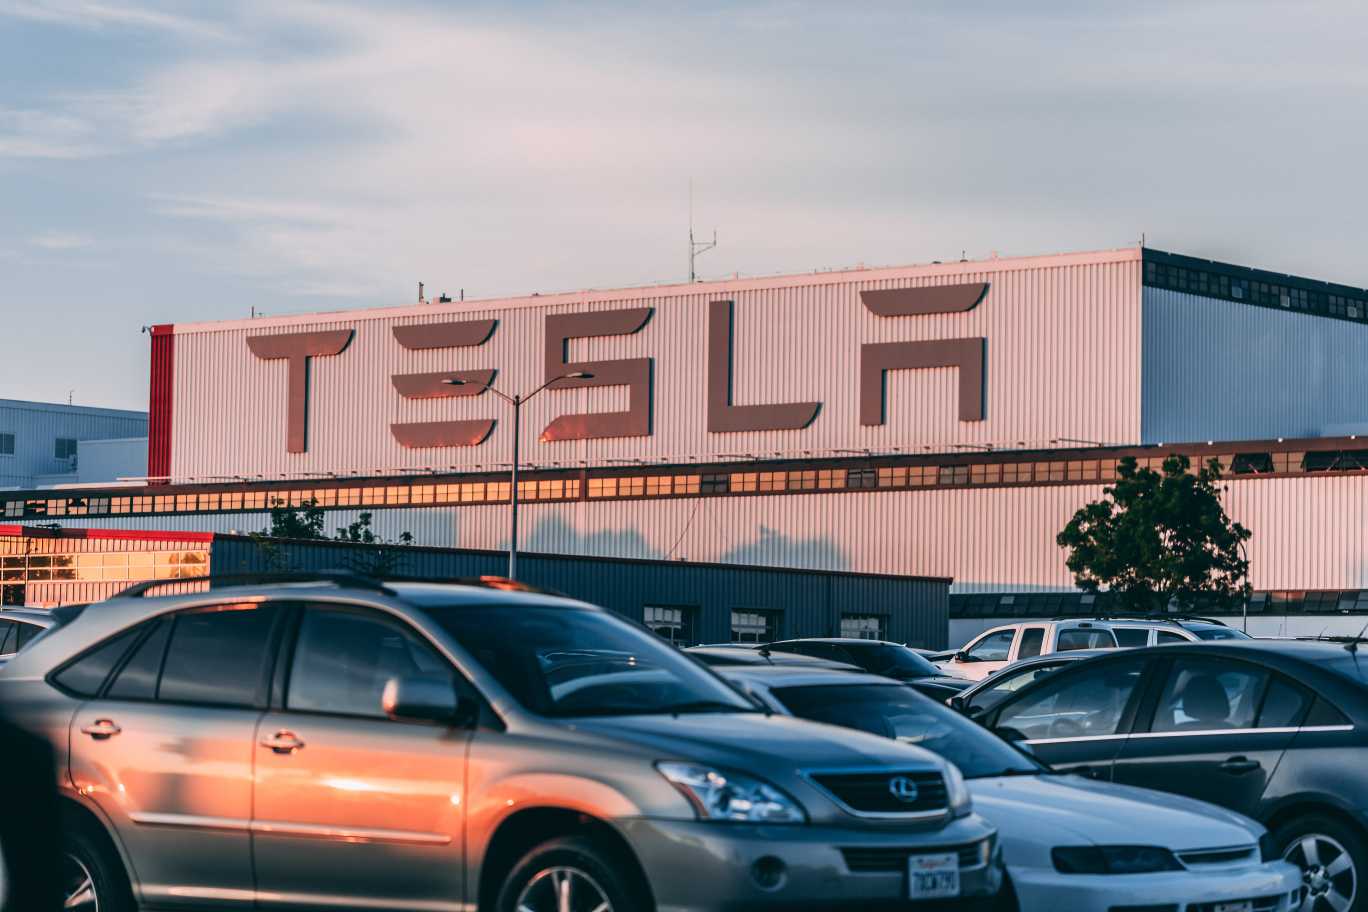 Why Could Tesla’s Case Help to Improve ESG Ratings